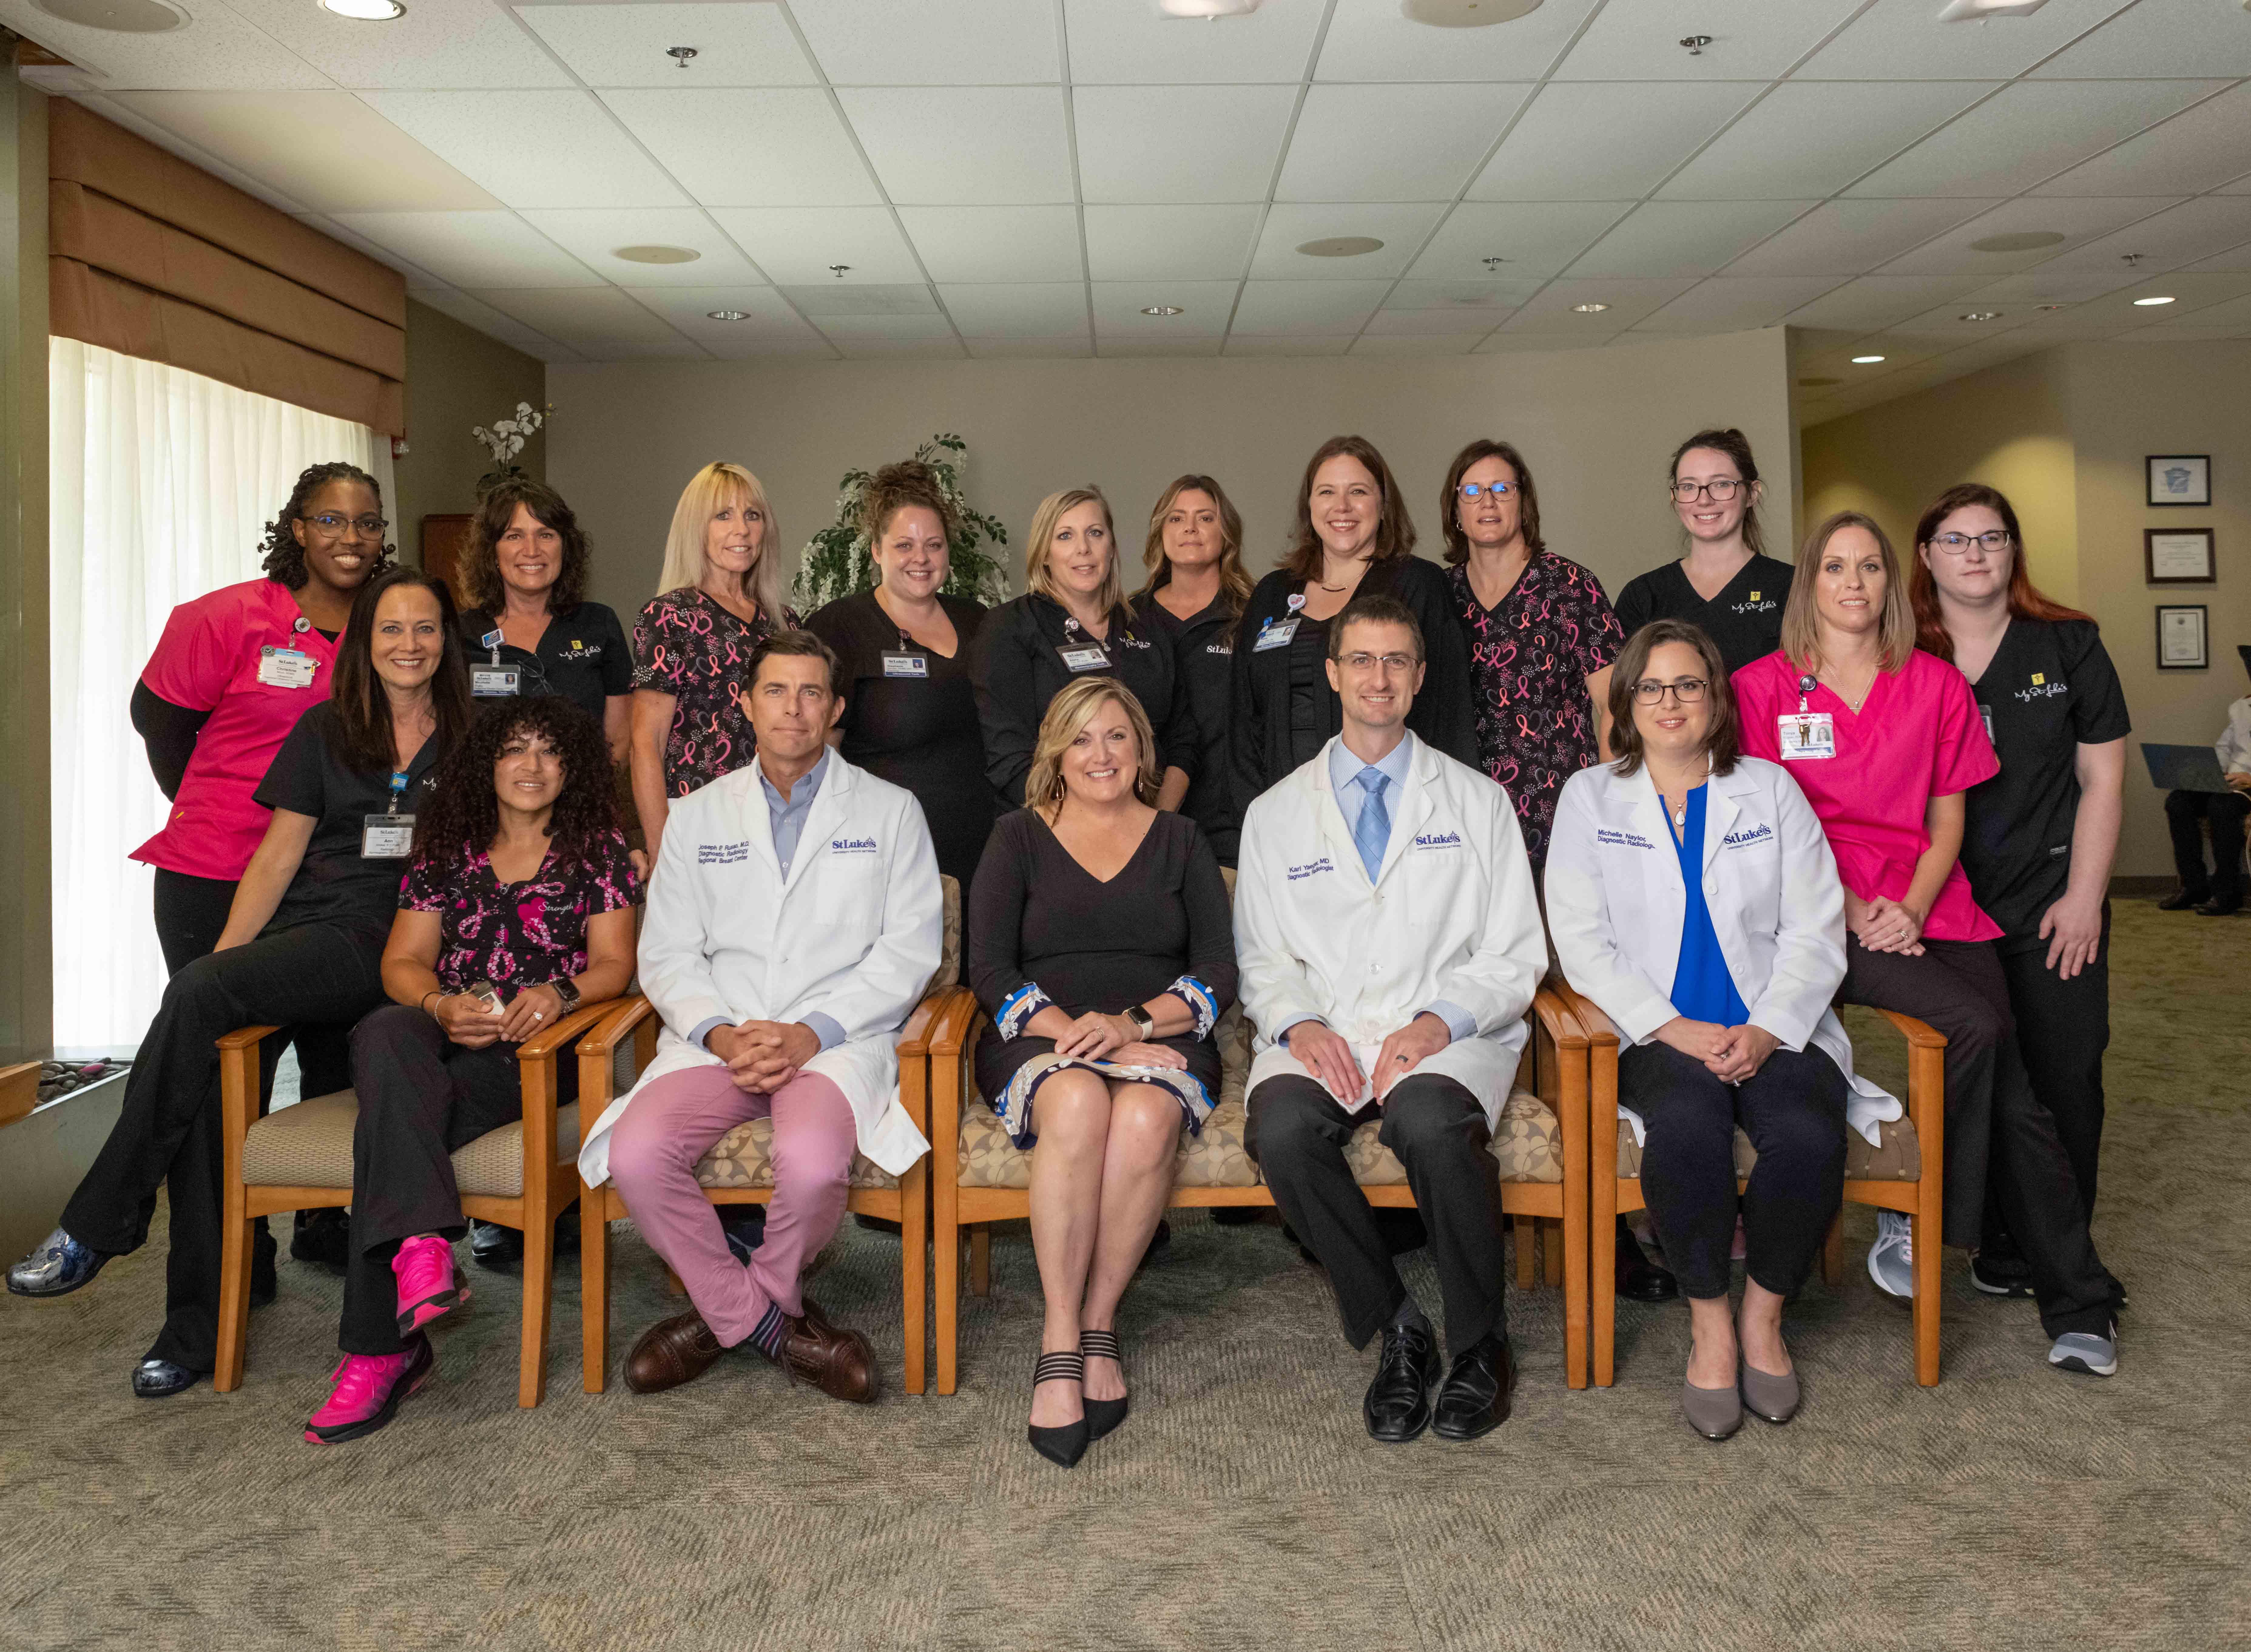 Members of St. Luke’s University Health Network, the first facility to adopt GE’s One-stop diagnostic model for rapid response breast cancer clinics in the US.